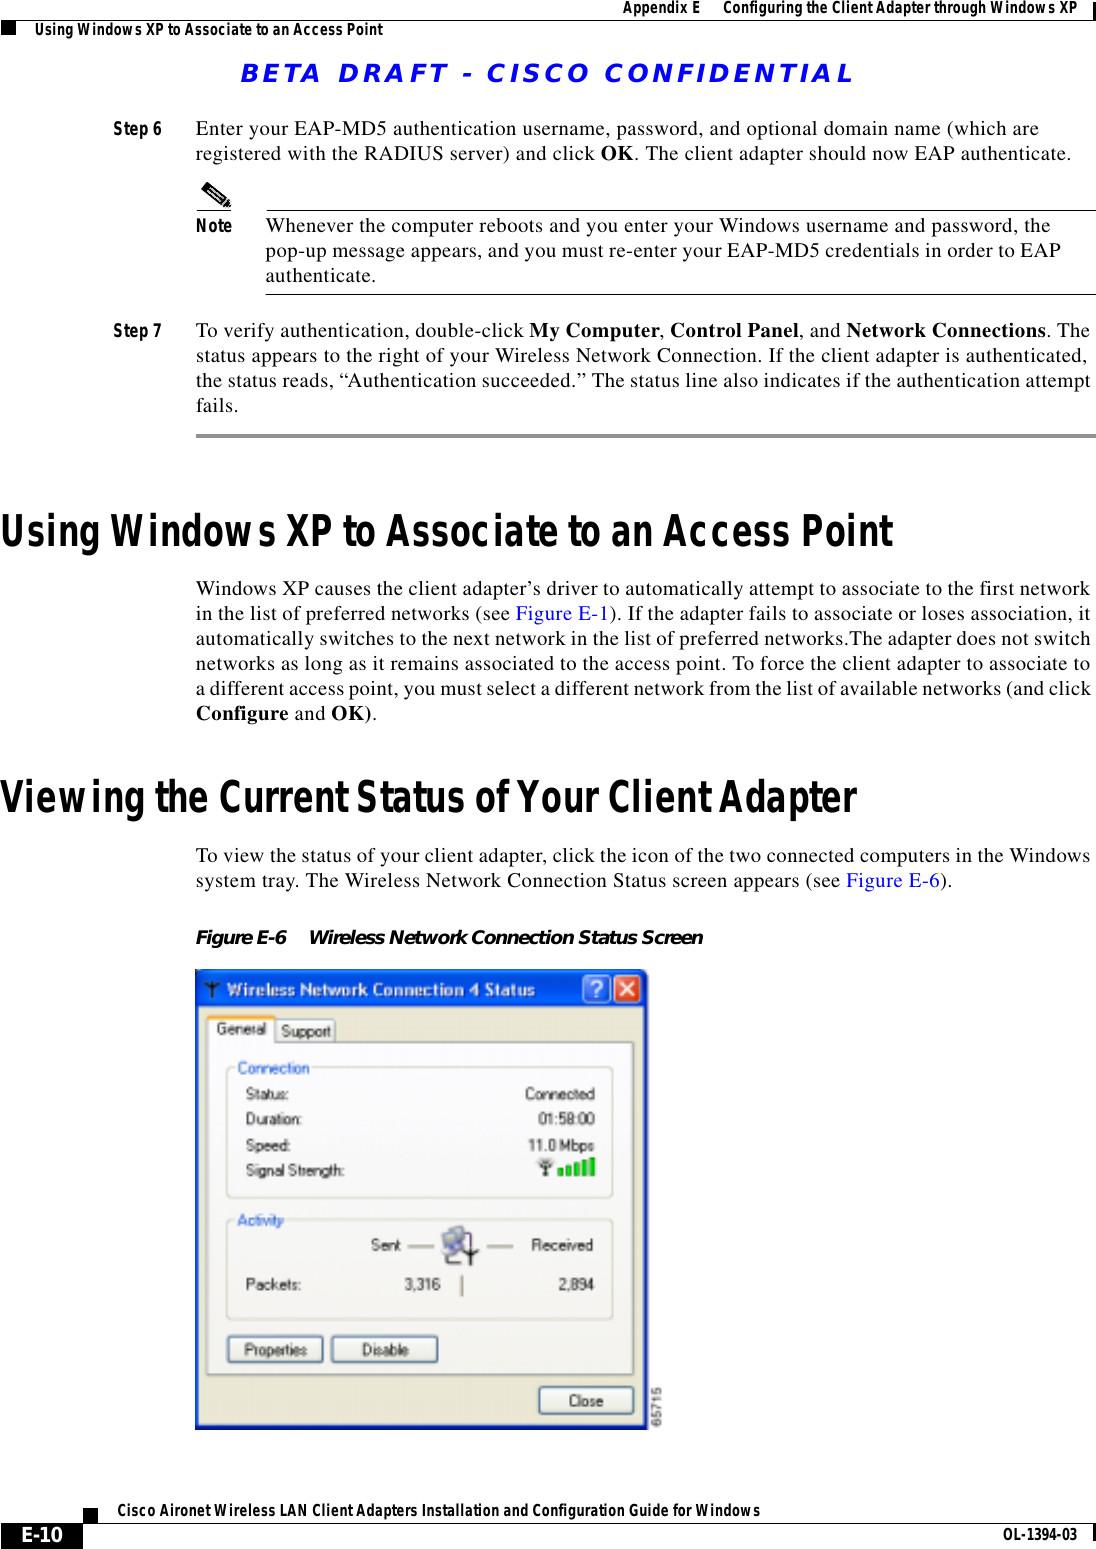 BETA DRAFT - CISCO CONFIDENTIALE-10Cisco Aironet Wireless LAN Client Adapters Installation and Configuration Guide for Windows OL-1394-03Appendix E      Configuring the Client Adapter through Windows XPUsing Windows XP to Associate to an Access PointStep 6 Enter your EAP-MD5 authentication username, password, and optional domain name (which are registered with the RADIUS server) and click OK. The client adapter should now EAP authenticate.Note Whenever the computer reboots and you enter your Windows username and password, the pop-up message appears, and you must re-enter your EAP-MD5 credentials in order to EAP authenticate.Step 7 To verify authentication, double-click My Computer, Control Panel, and Network Connections. The status appears to the right of your Wireless Network Connection. If the client adapter is authenticated, the status reads, “Authentication succeeded.” The status line also indicates if the authentication attempt fails.Using Windows XP to Associate to an Access PointWindows XP causes the client adapter’s driver to automatically attempt to associate to the first network in the list of preferred networks (see Figure E-1). If the adapter fails to associate or loses association, it automatically switches to the next network in the list of preferred networks.The adapter does not switch networks as long as it remains associated to the access point. To force the client adapter to associate to a different access point, you must select a different network from the list of available networks (and click Configure and OK).Viewing the Current Status of Your Client AdapterTo view the status of your client adapter, click the icon of the two connected computers in the Windows system tray. The Wireless Network Connection Status screen appears (see Figure E-6).Figure E-6 Wireless Network Connection Status Screen